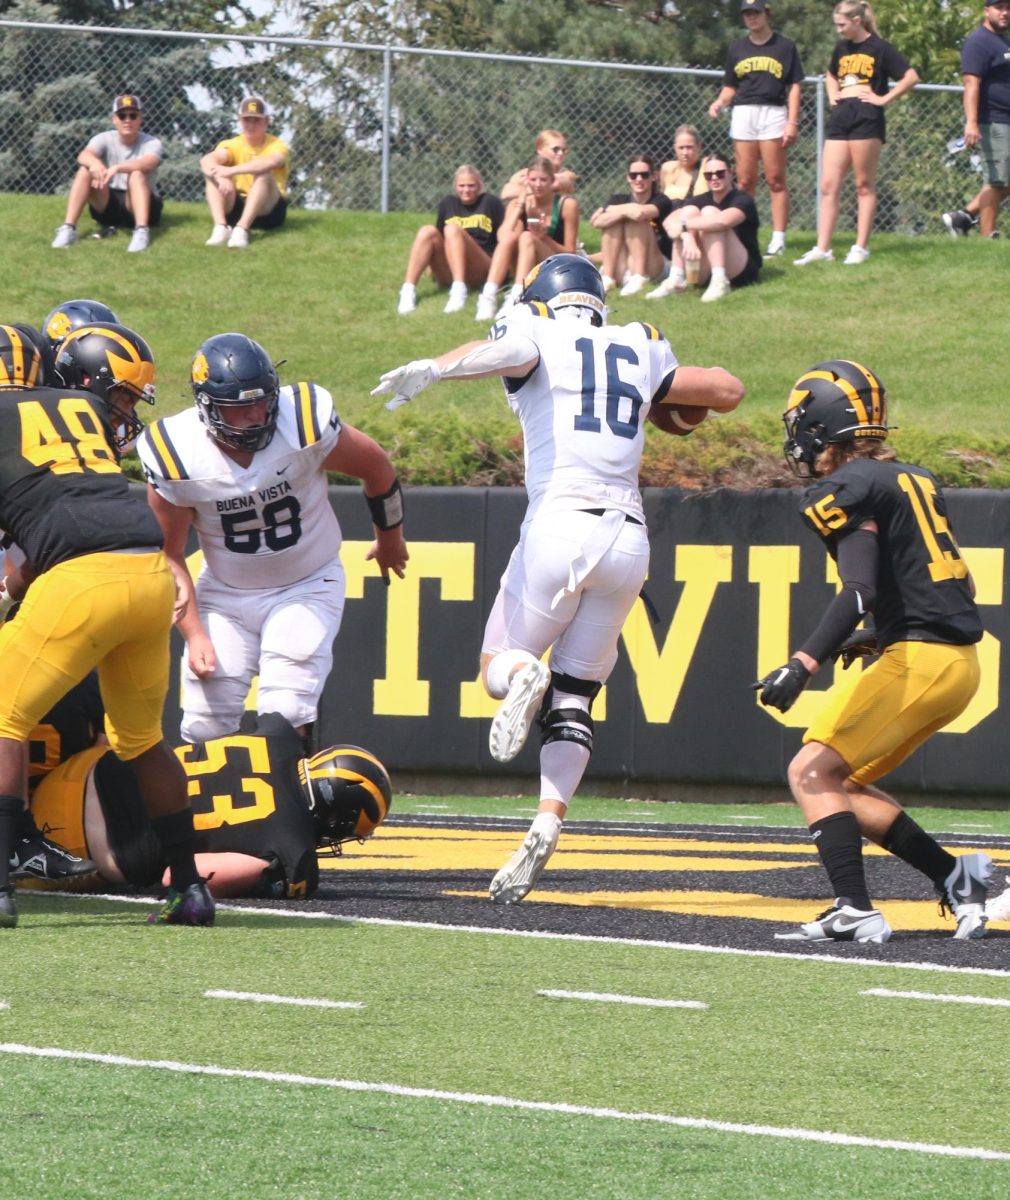 Keaton Huebner (#16) with a touchdown for the Beavers.